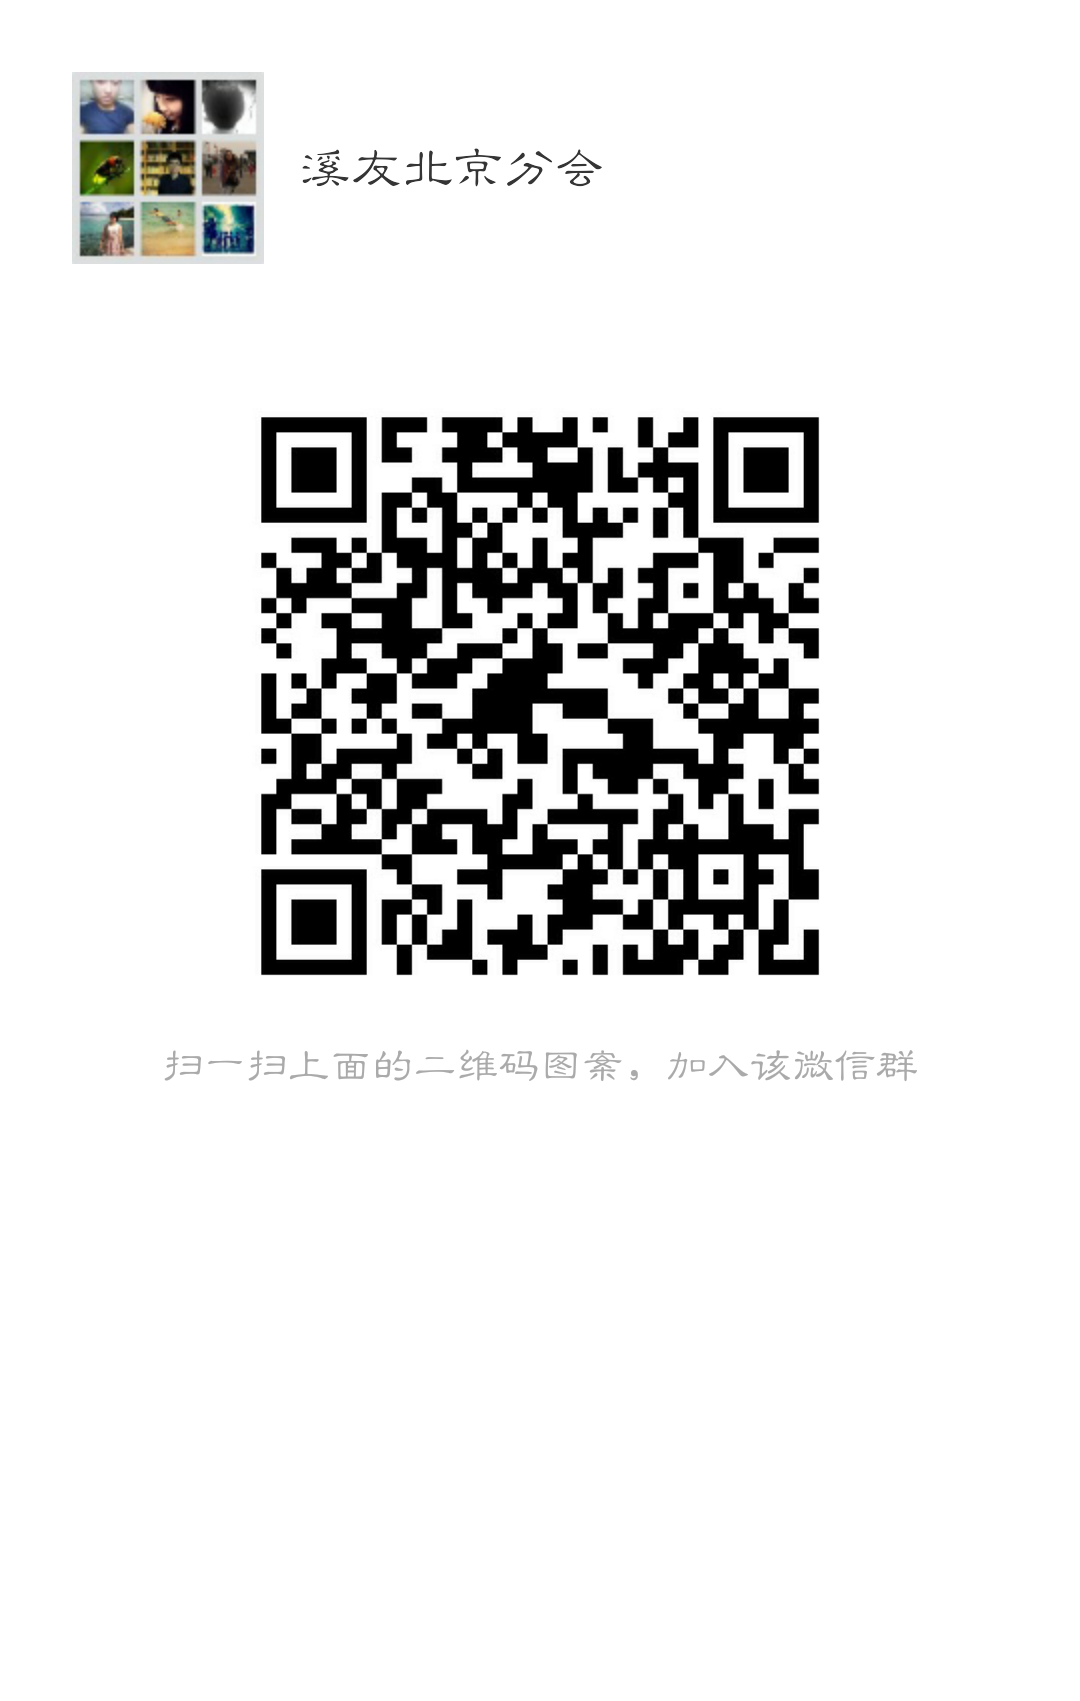 mmqrcode1418400847761.png